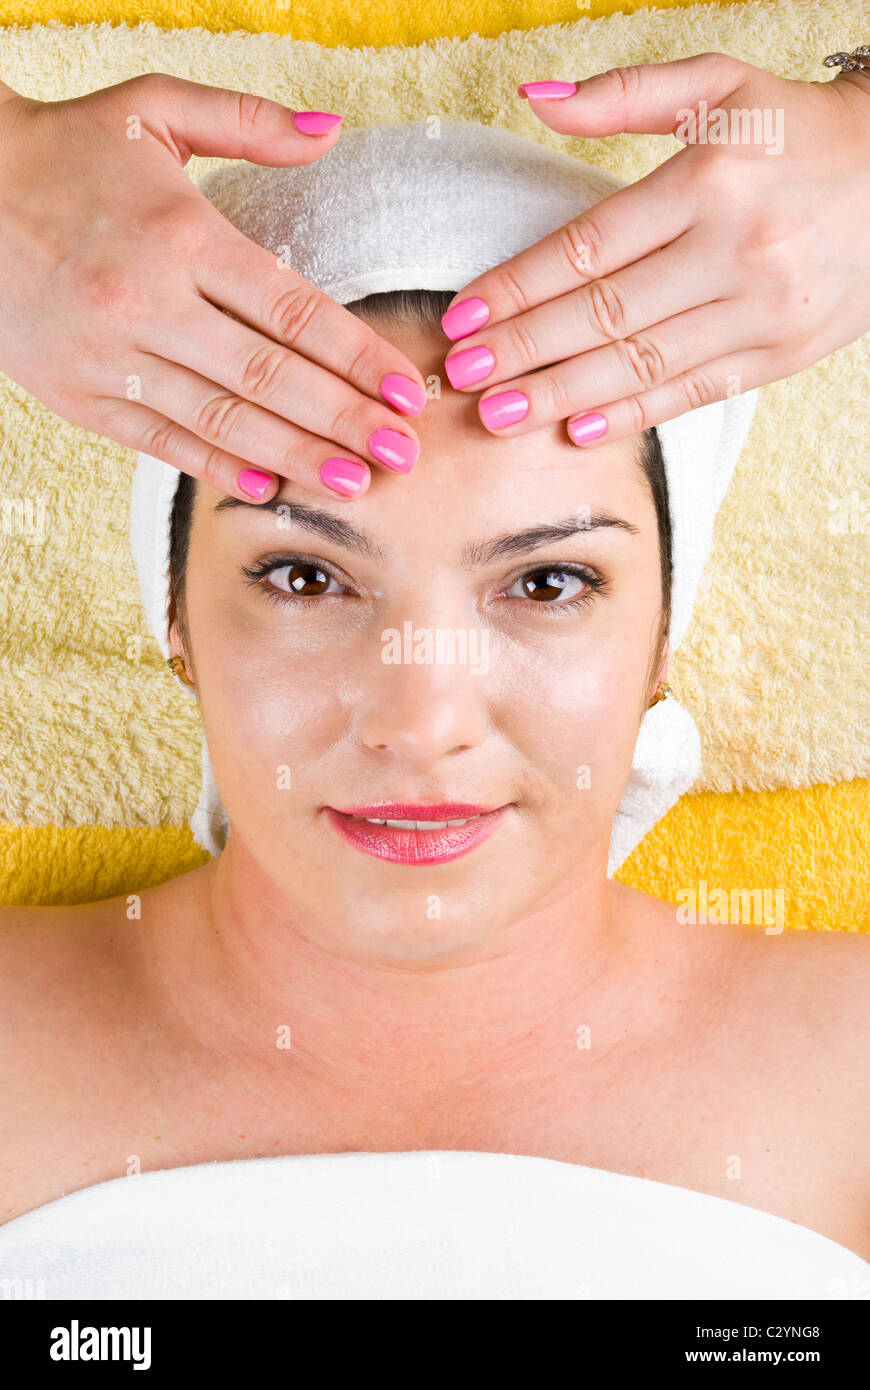 Attractive woman getting a facial massage at spa salon and looking happy Stock Photo